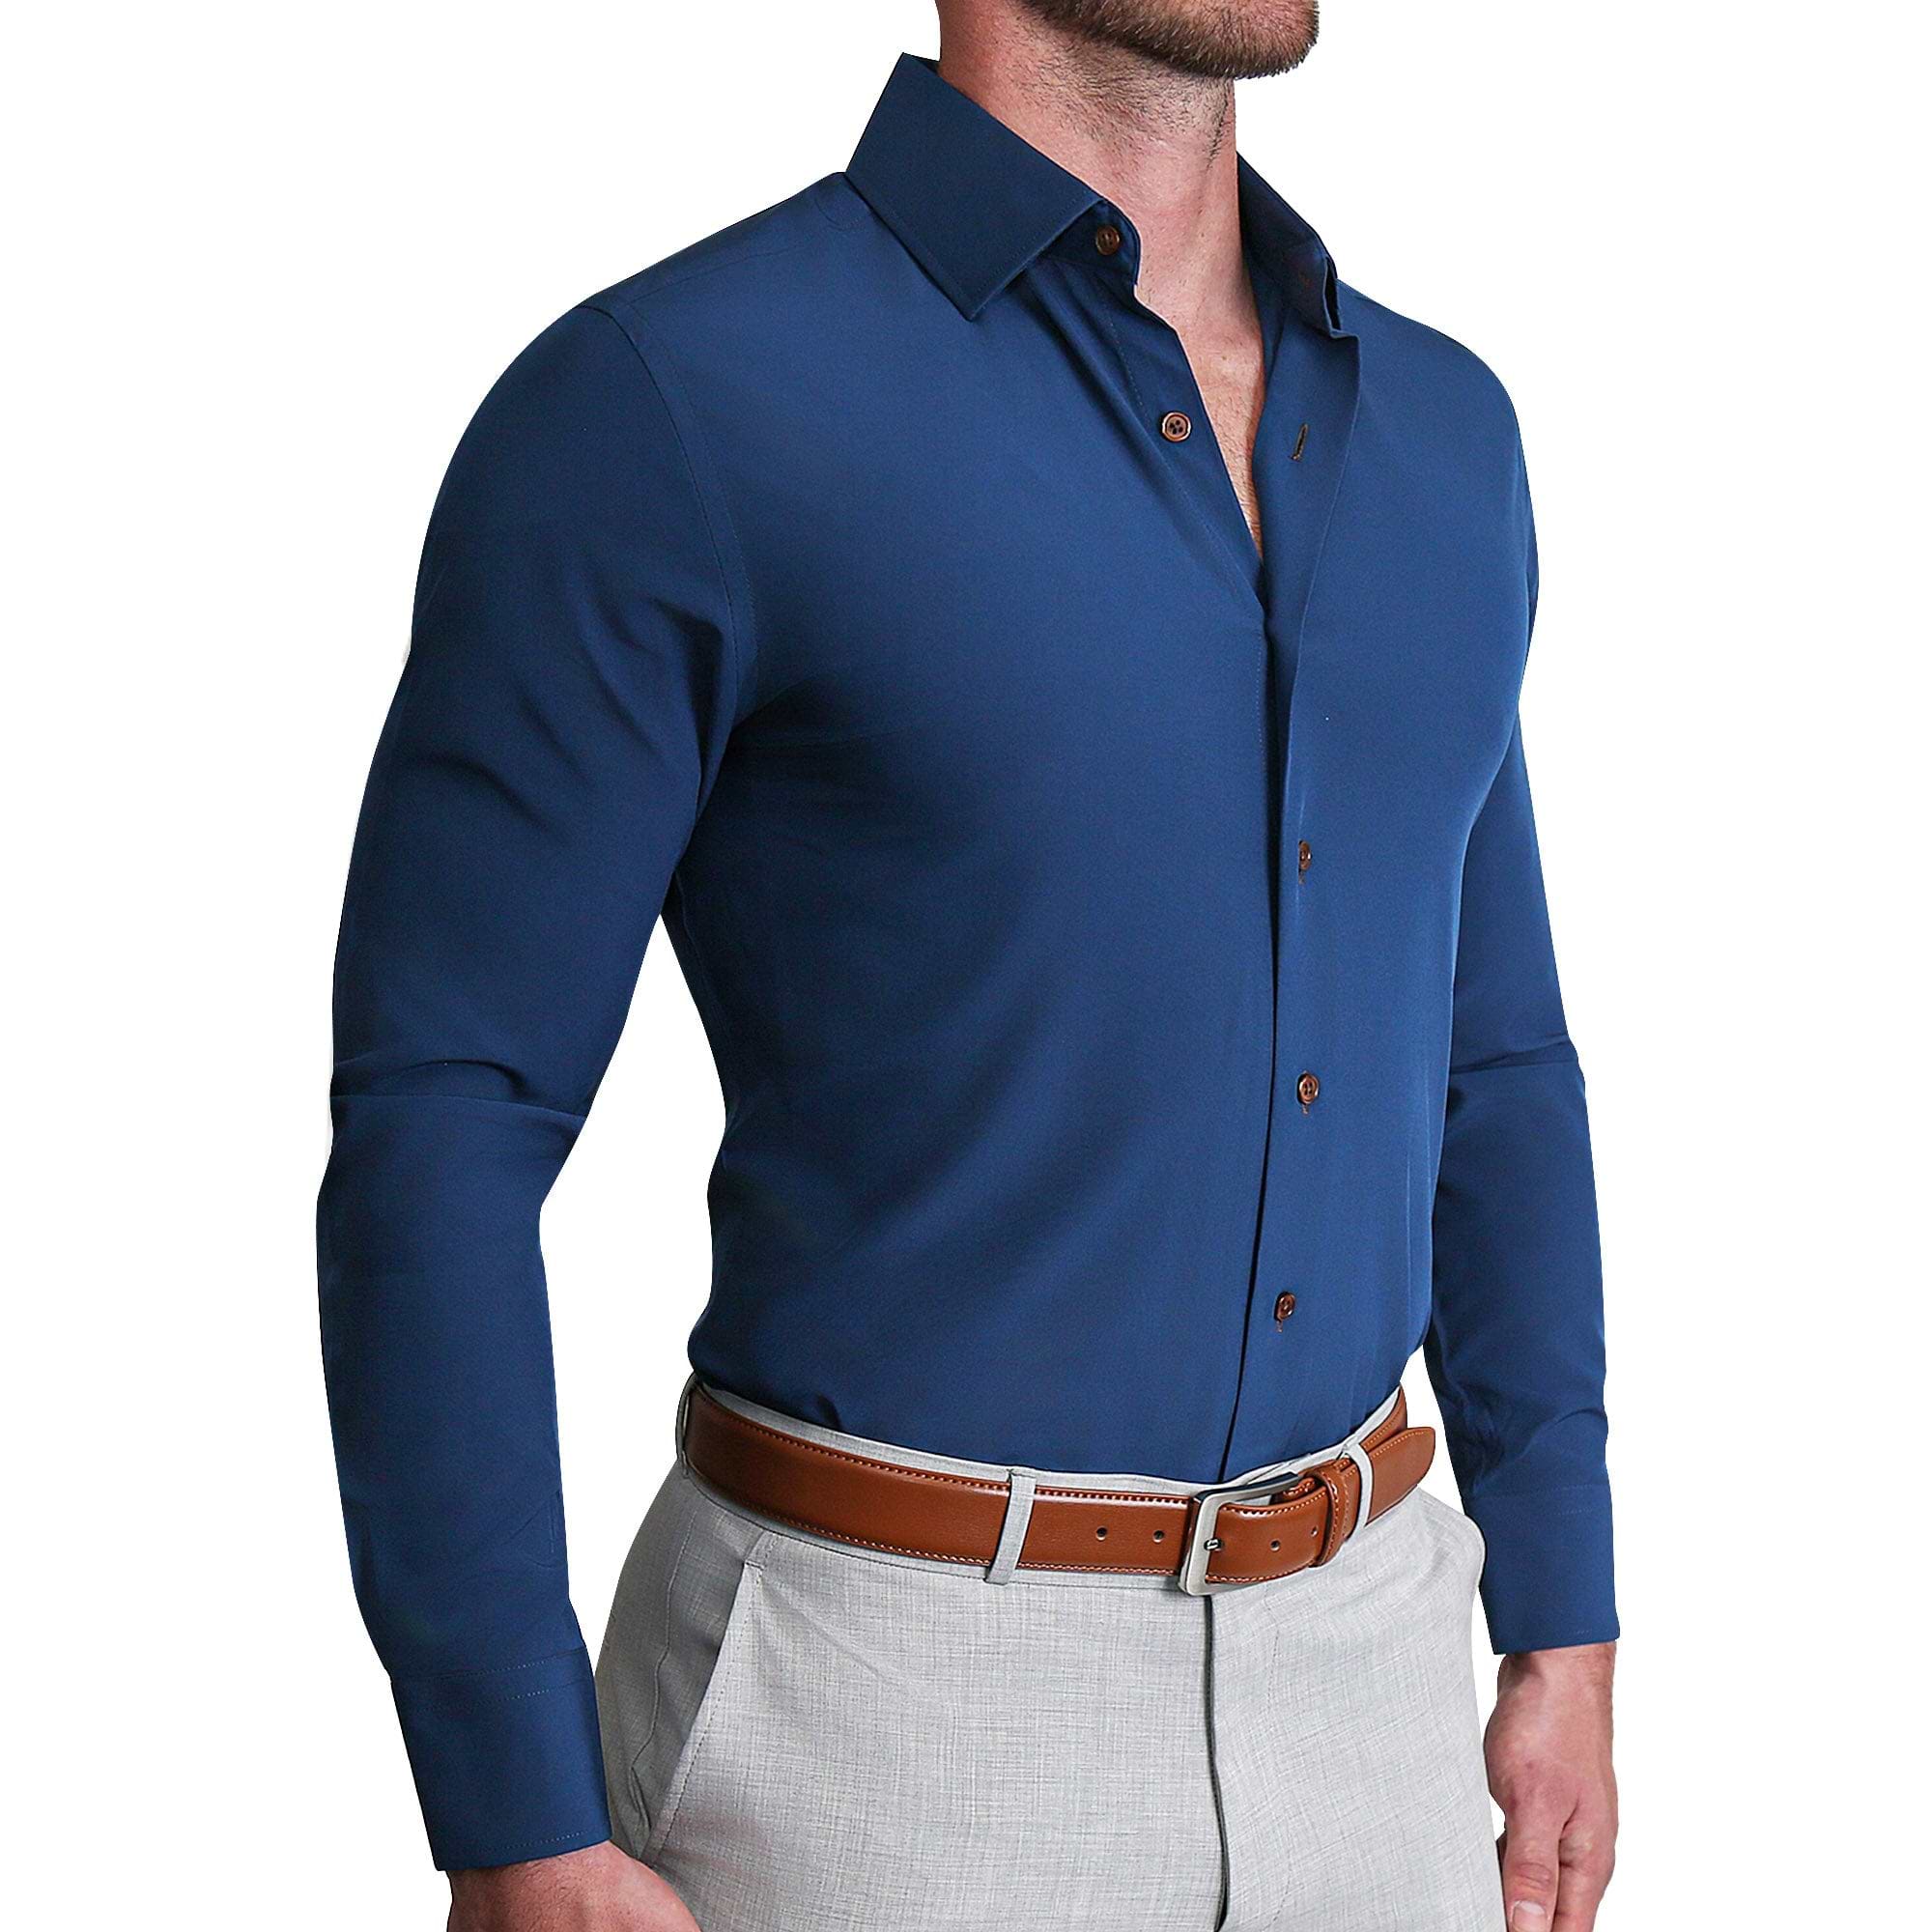 Most Attractive Shirt Colors. Best Formal Shirt Colors For Men. - YouTube |  Shirt outfit men, Formal men outfit, Formal shirts for men